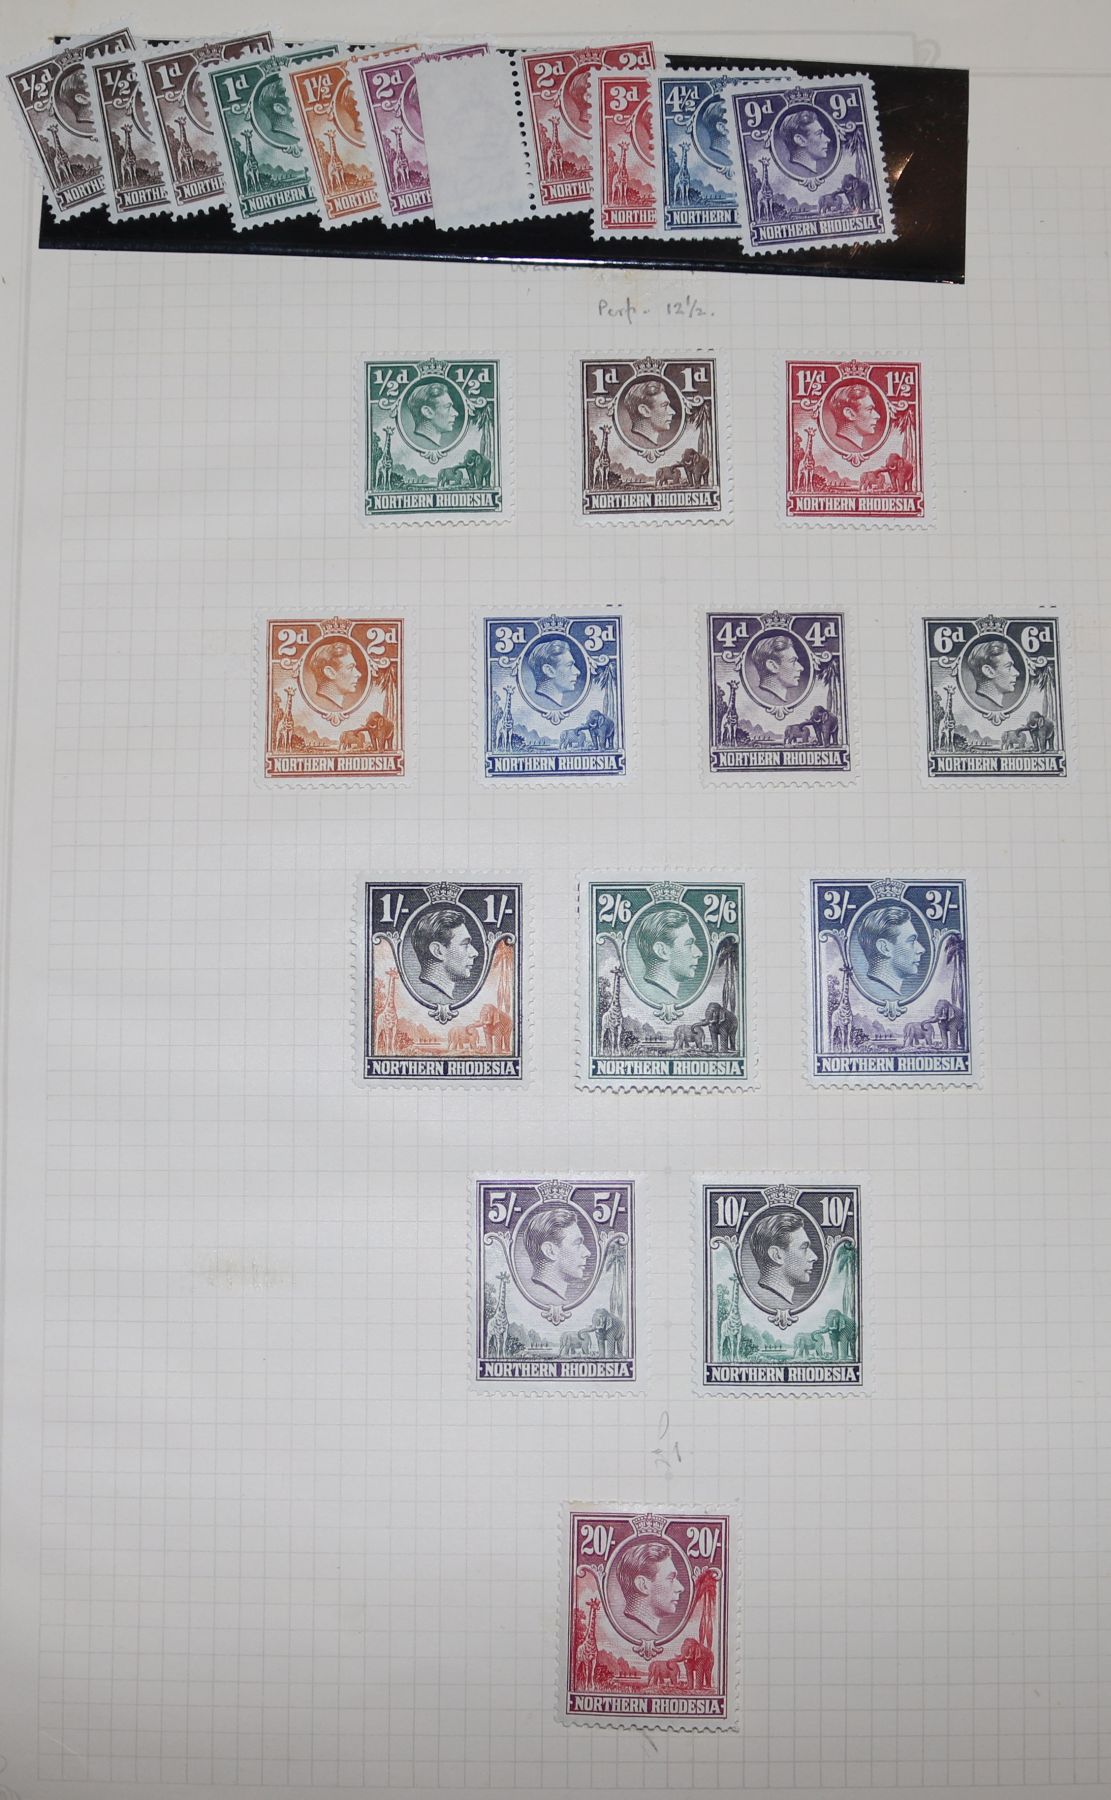 A QV to QEII mint and used collection of British Africa stamps in a stockbook including